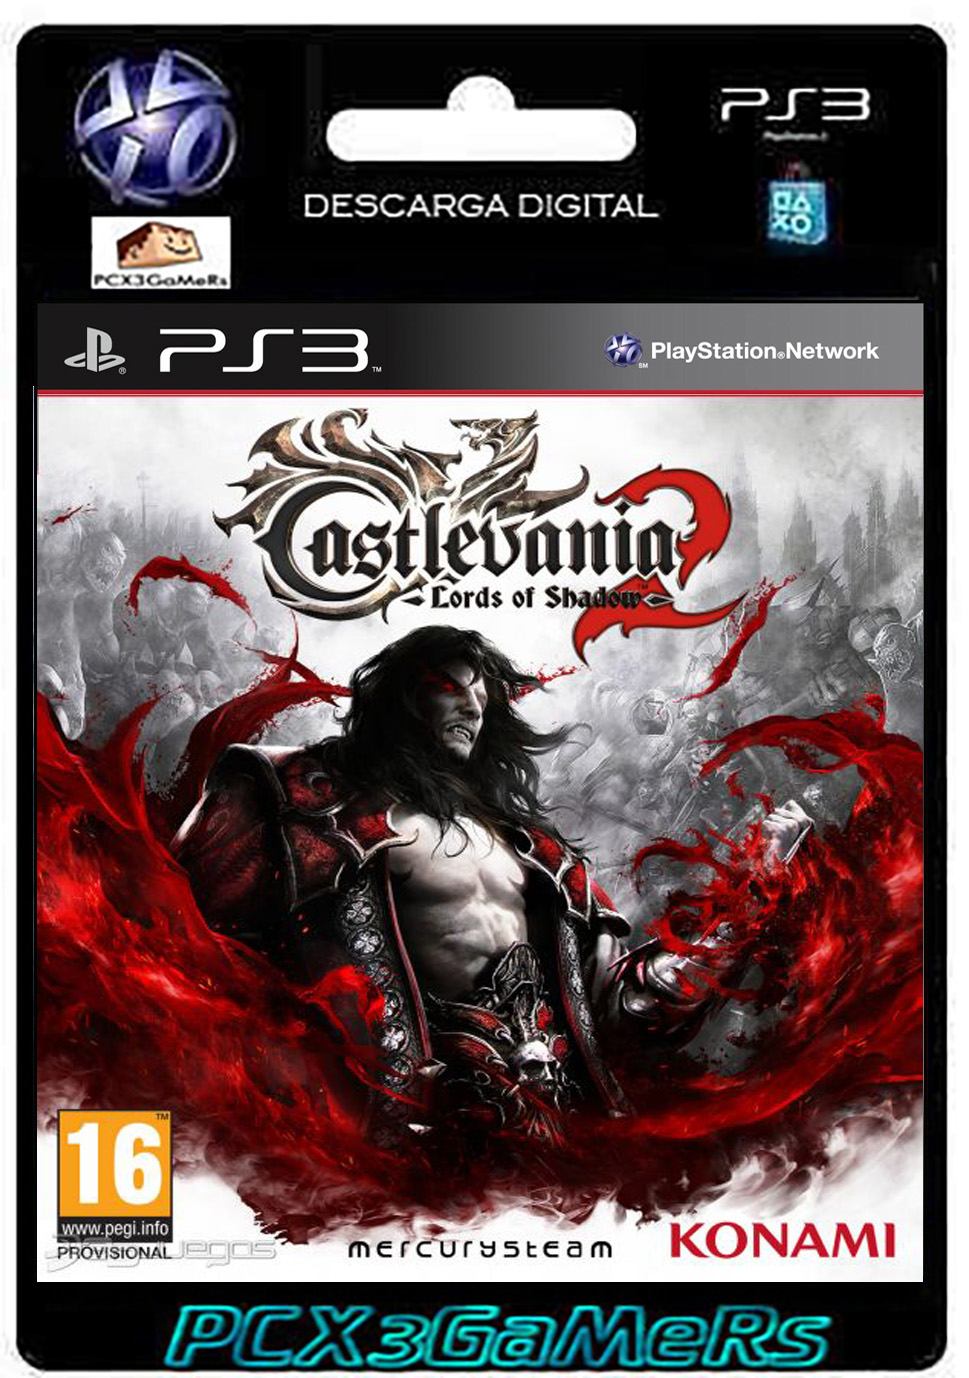 PS3 Castlevania: Lords of Shadow 2